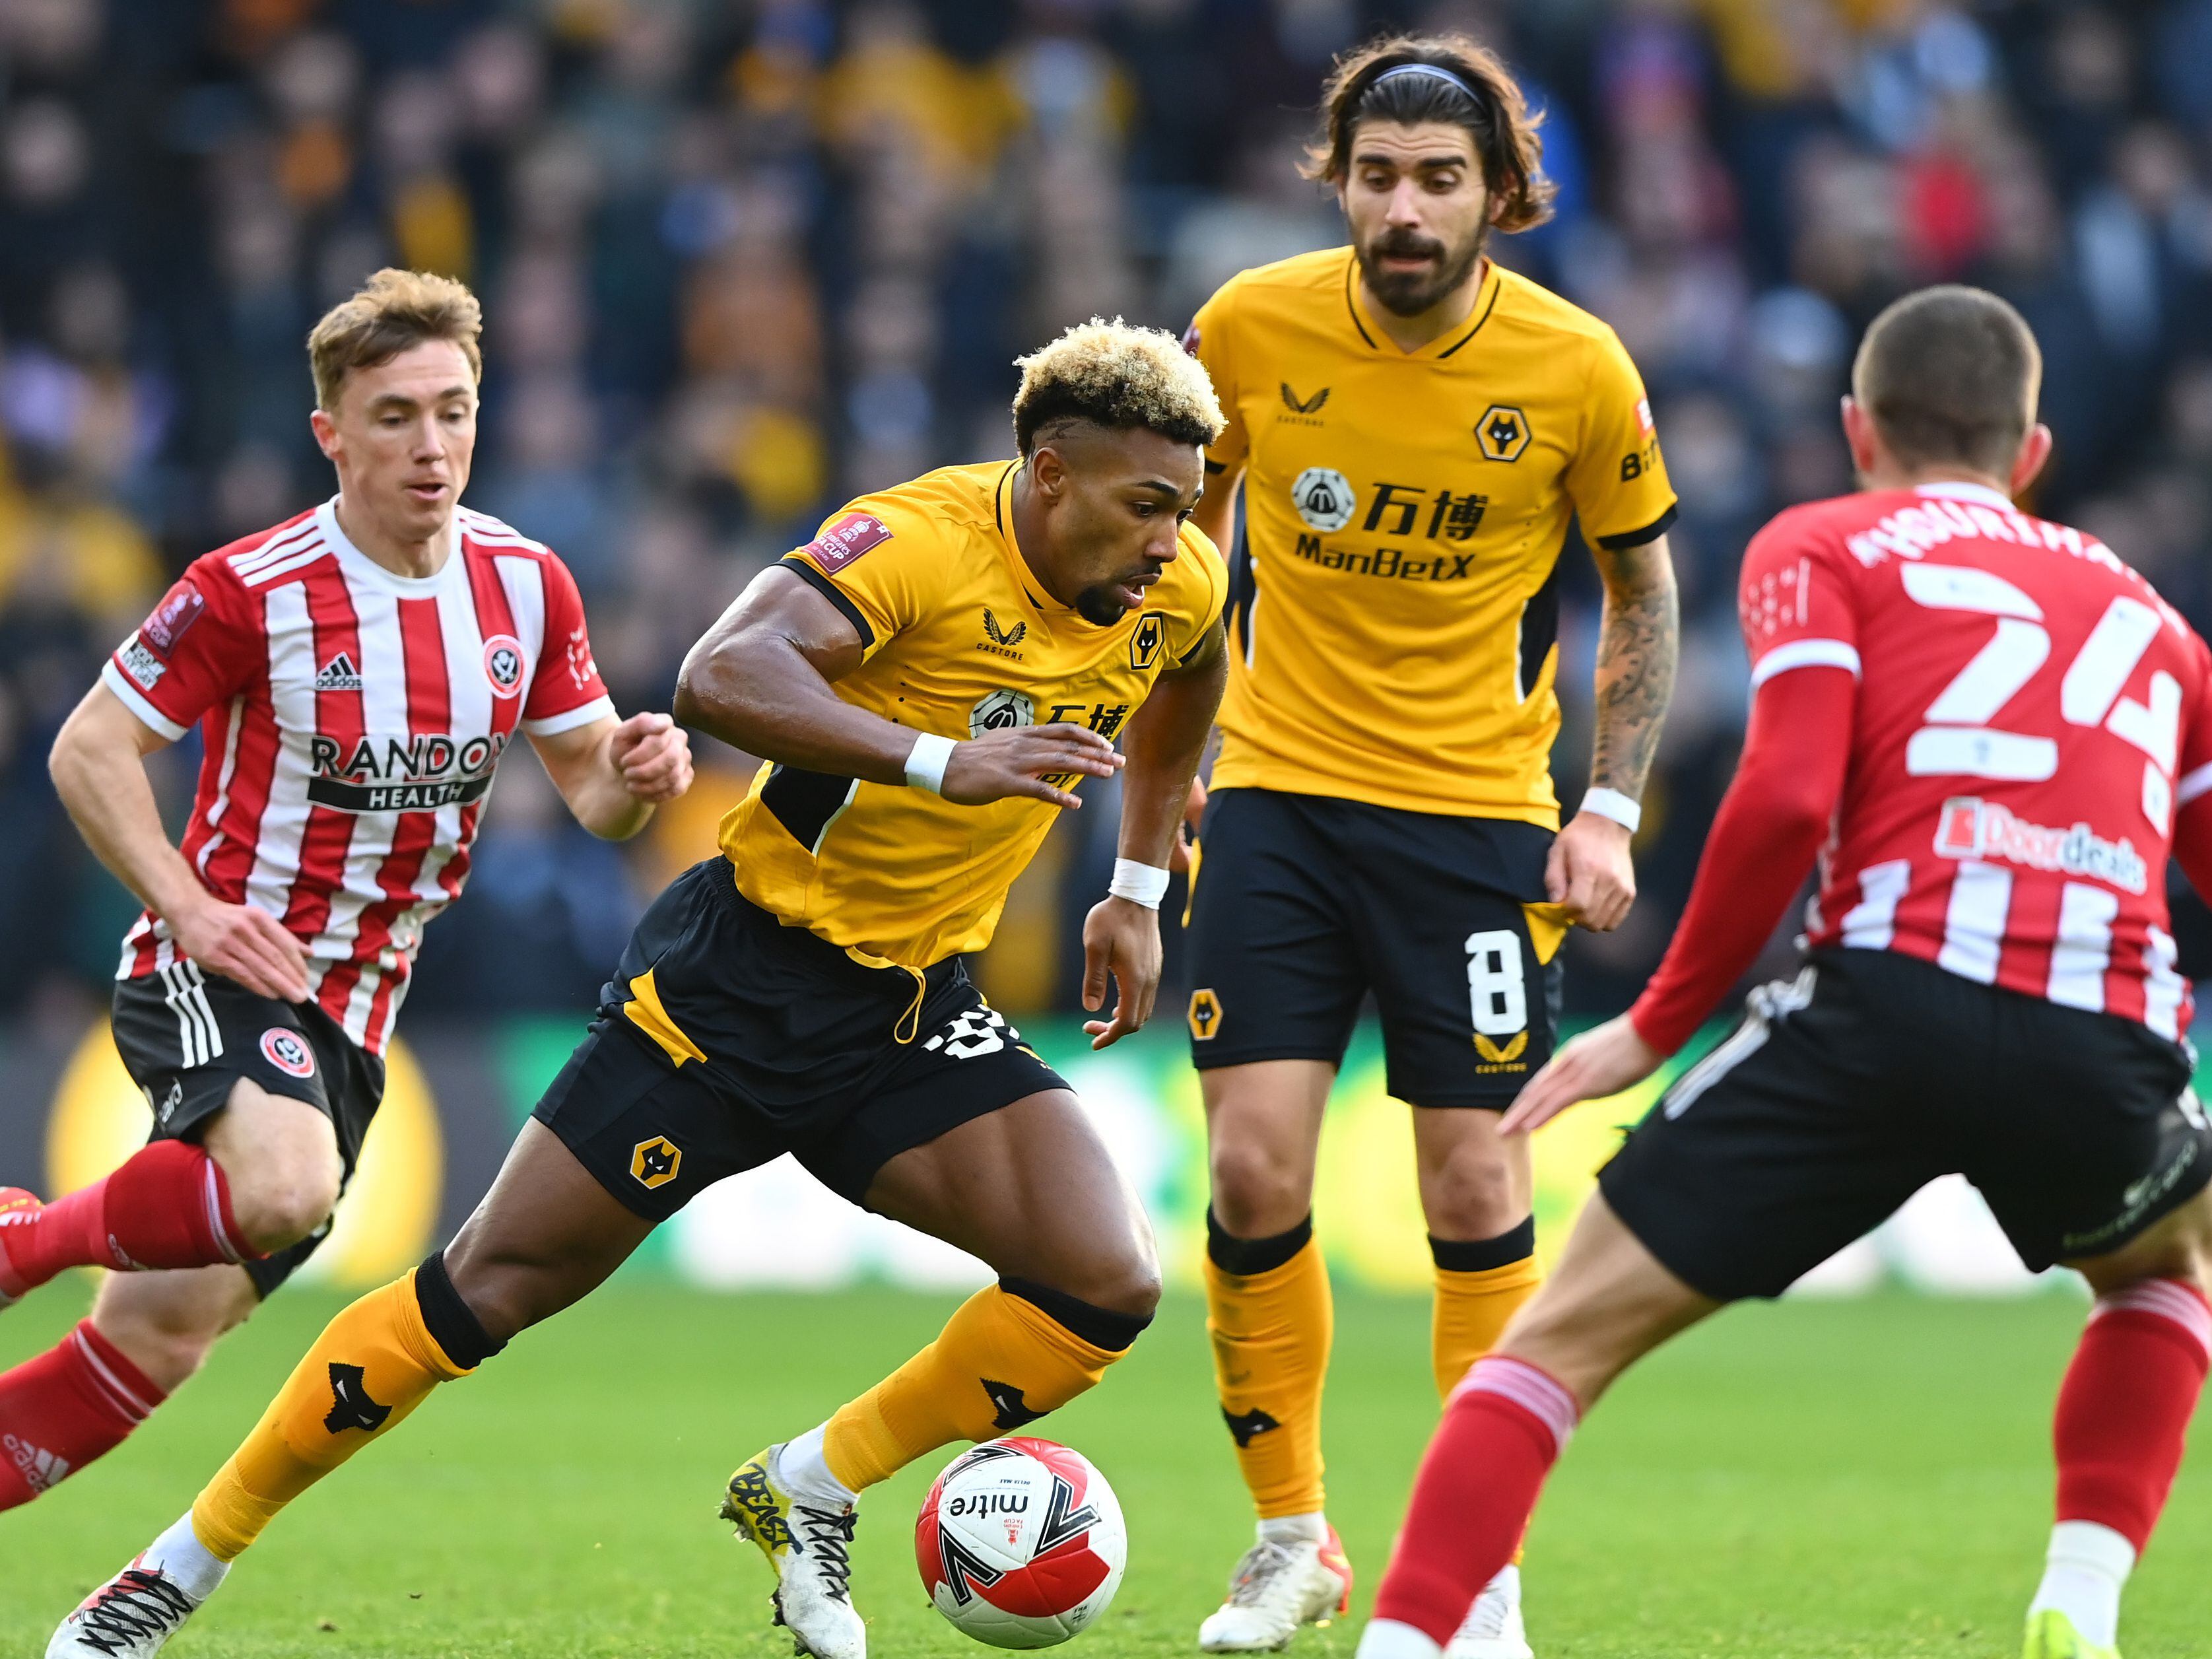 Wolves turn down £15m Spurs offer for Adama Traore, reports suggest